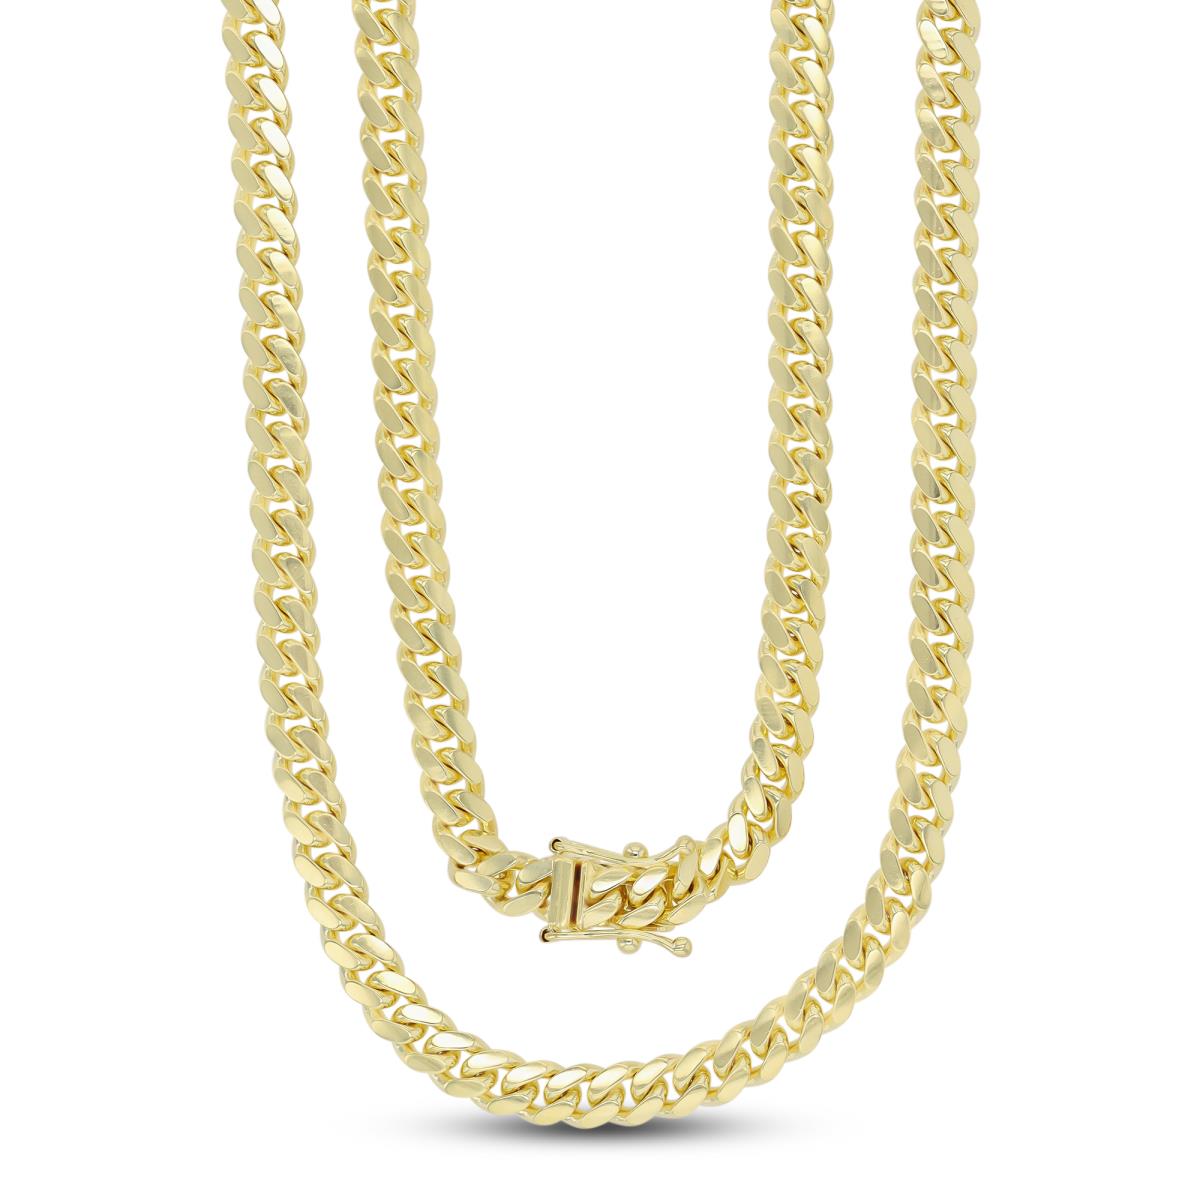 14K Yellow Gold 5mm Solid Miami Cuban 150 24" Chain With Box Lock